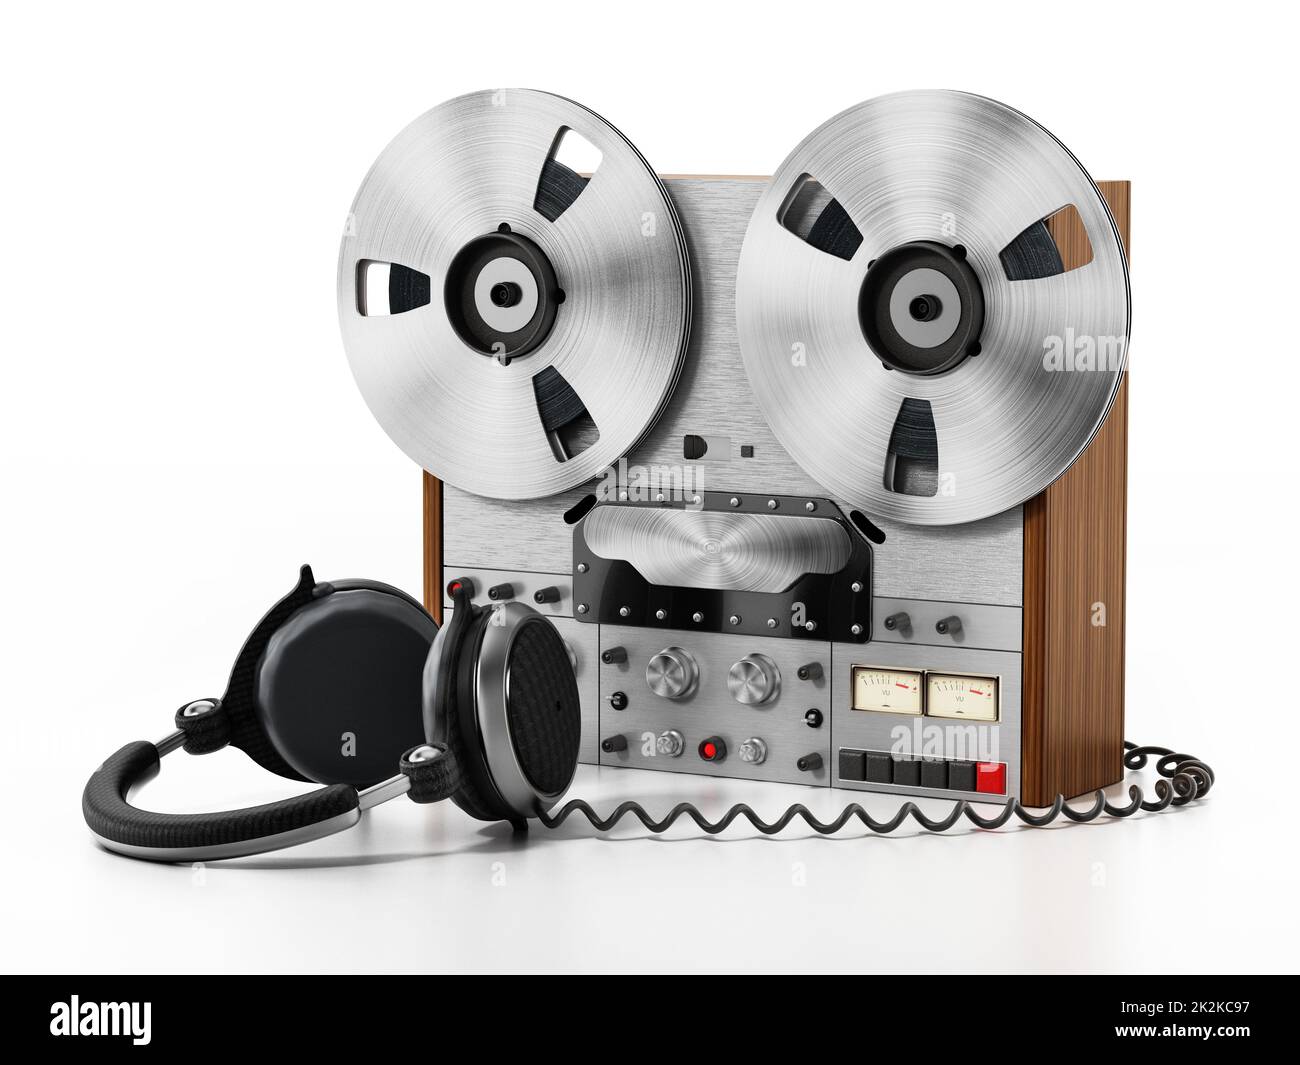 Reel to Reel Tape Recorder Manufacturers - Amplifier Corporation of America  - Museum of Magnetic Sound Recording